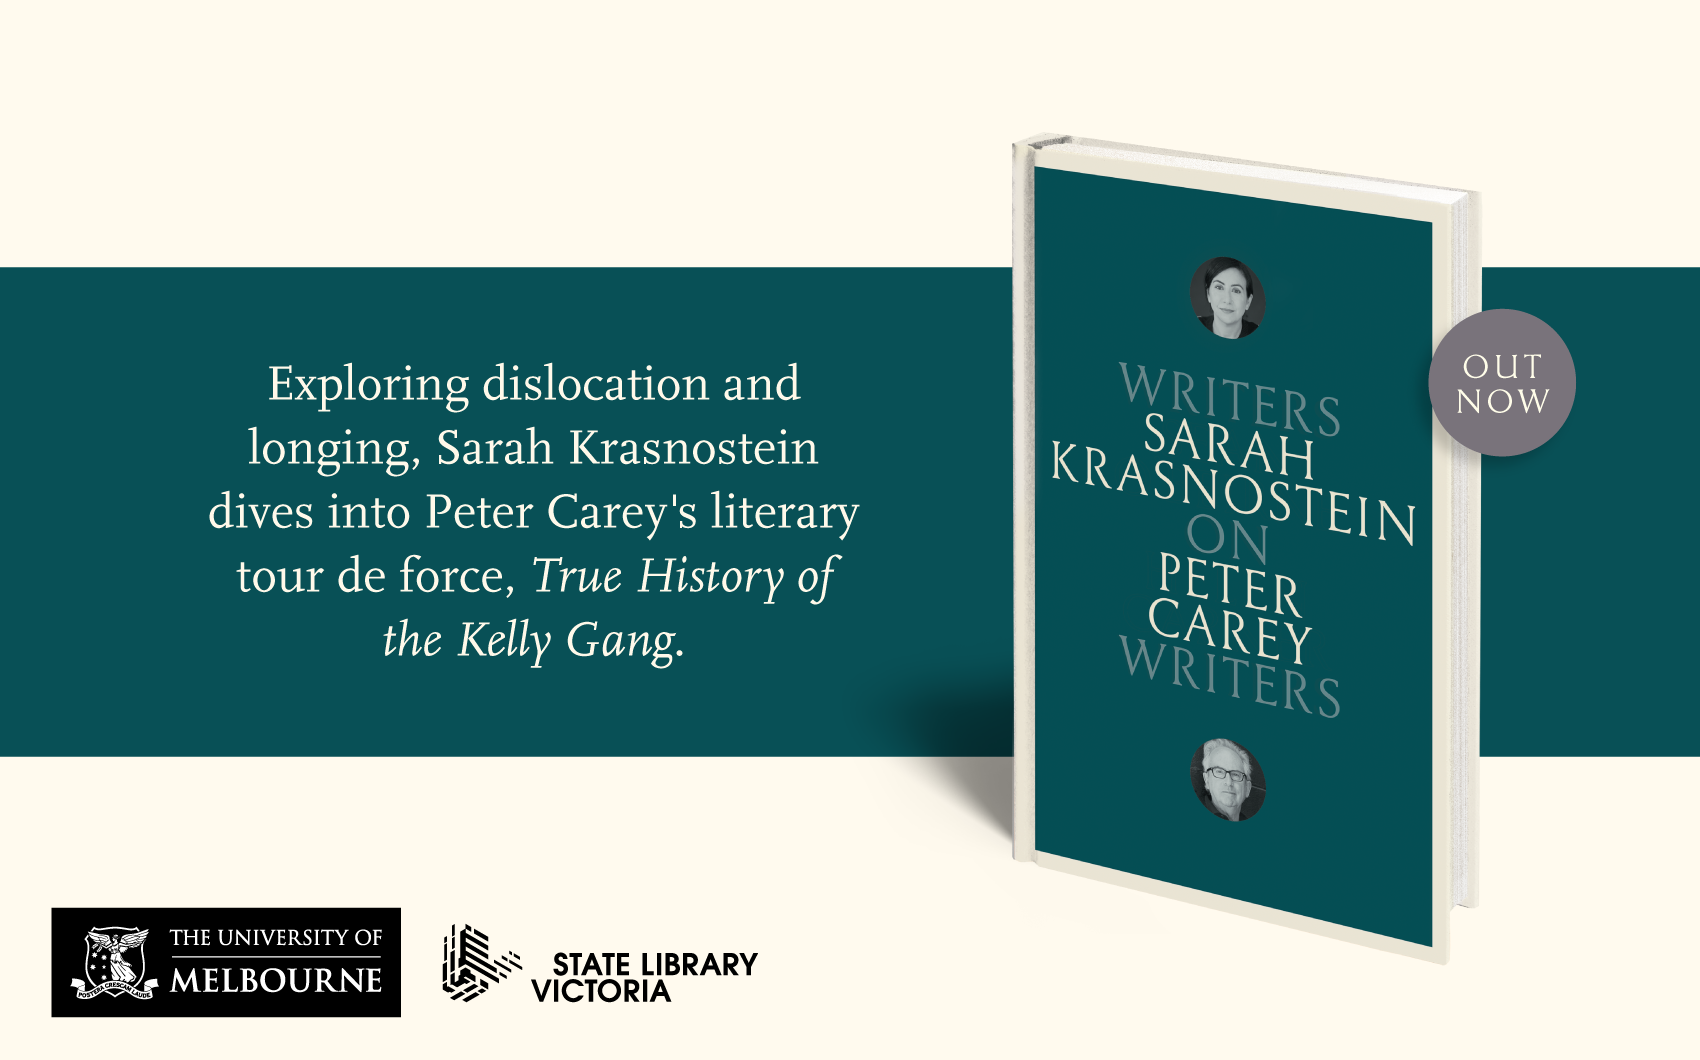 Out now: On Peter Carey